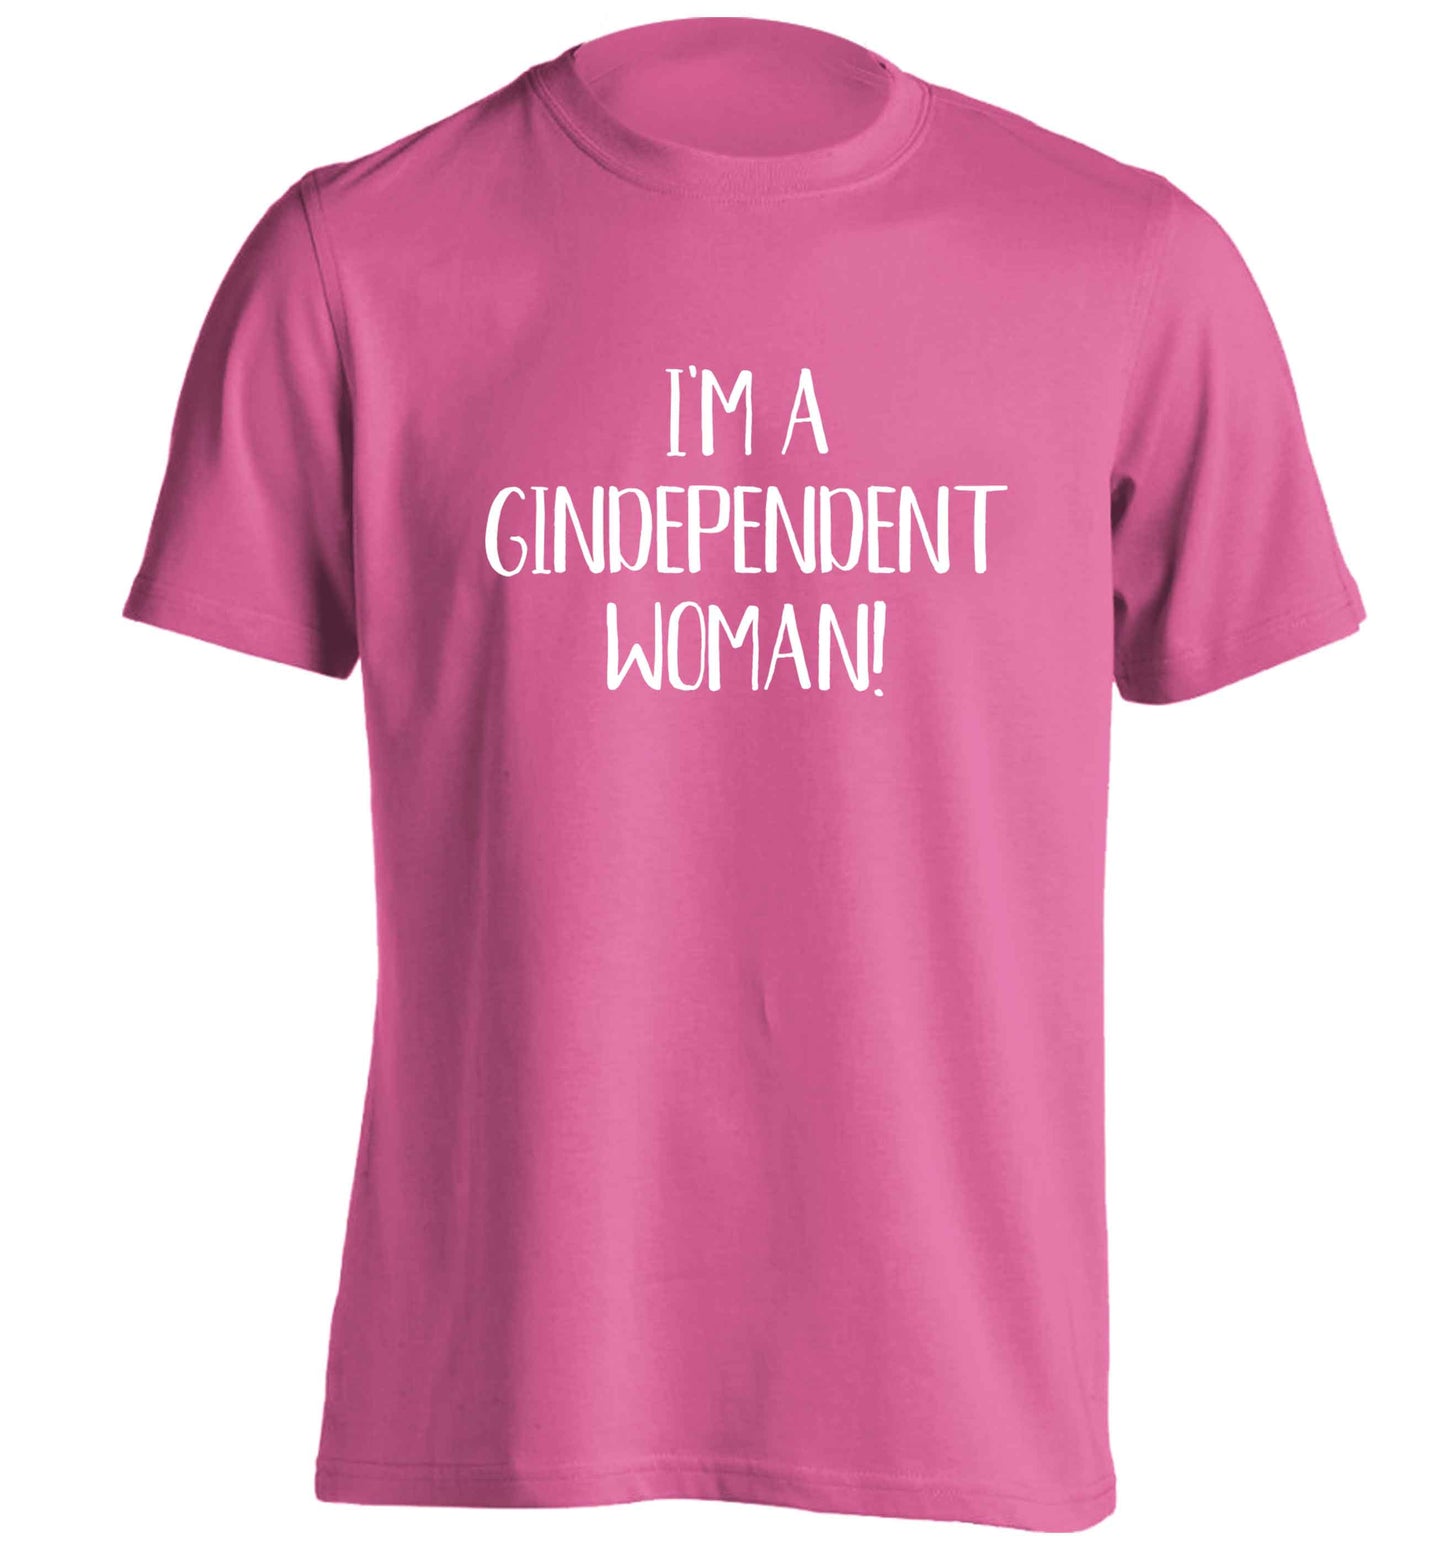 I'm a gindependent woman adults unisex pink Tshirt 2XL